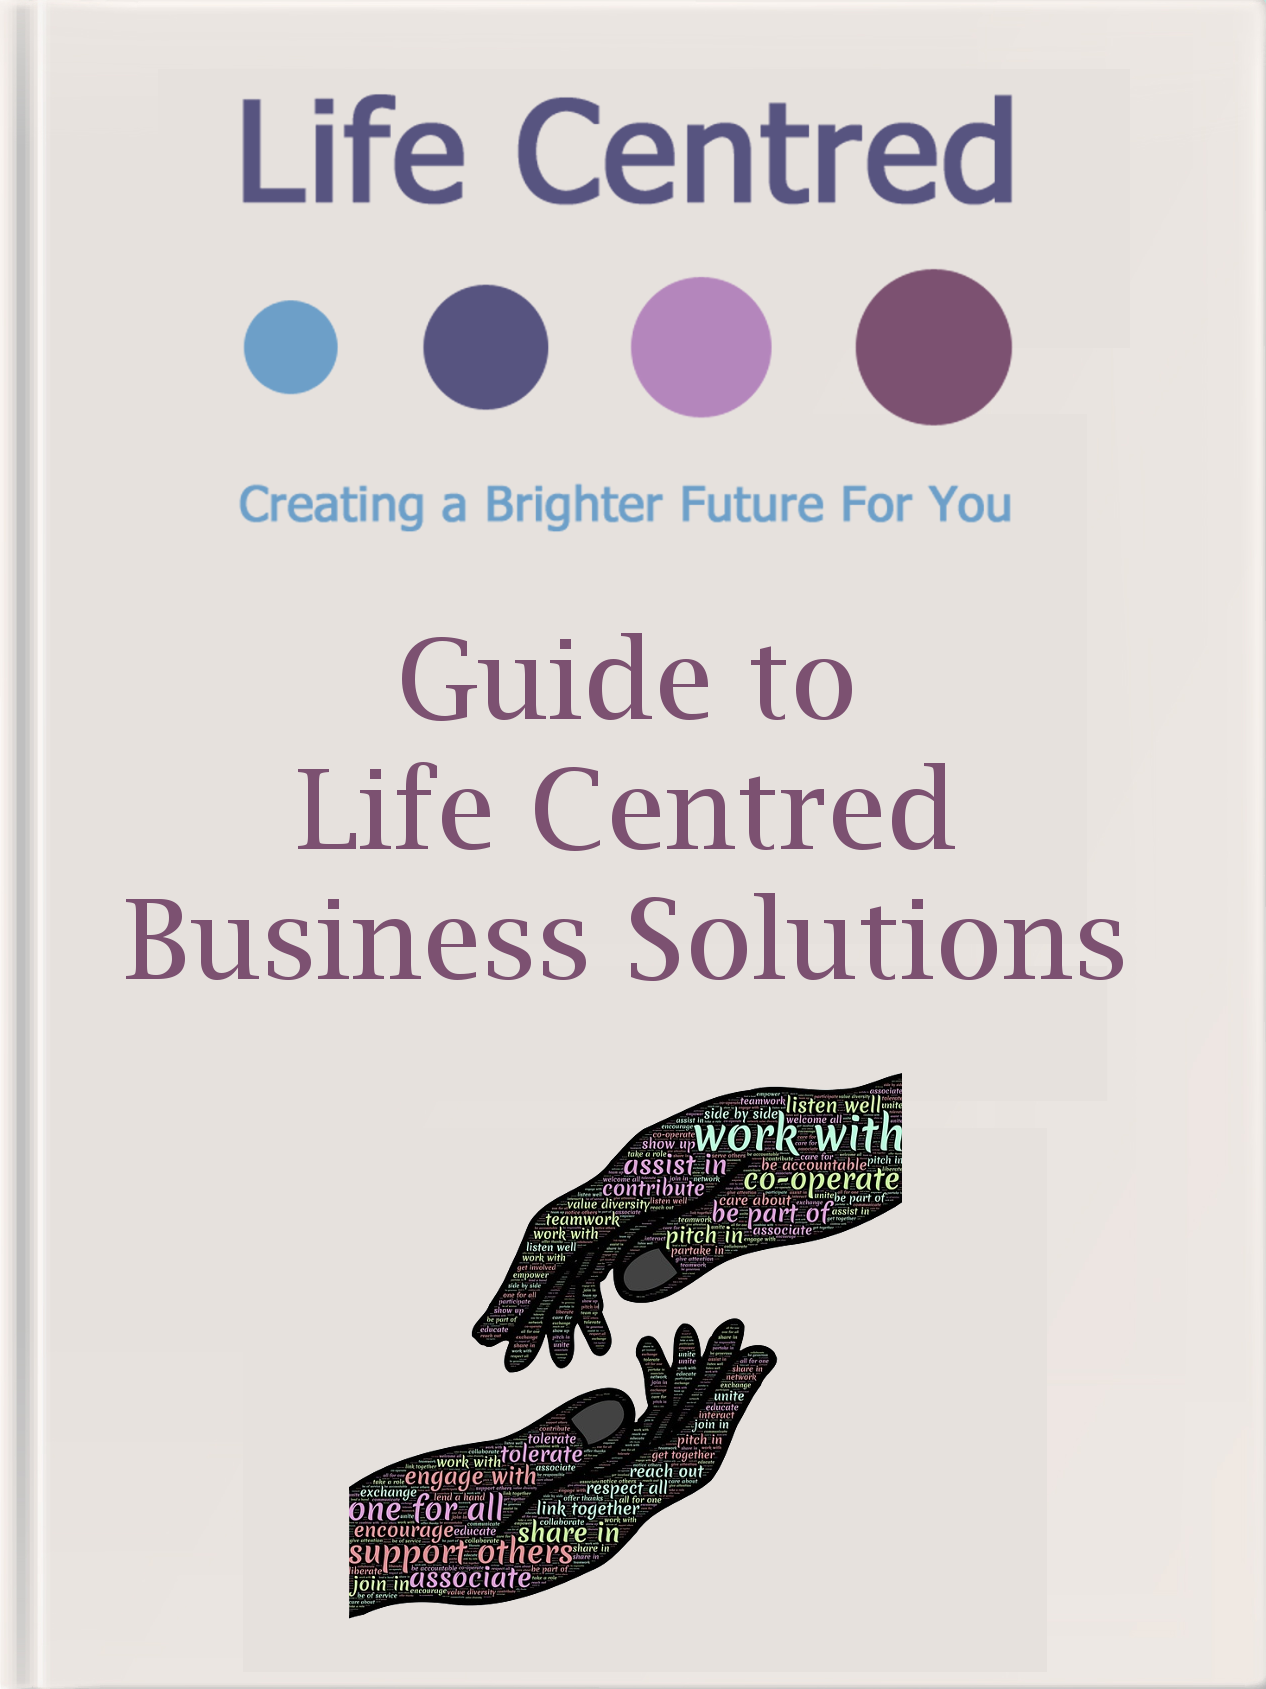 Download our Guide to Life Centred Business Solutions